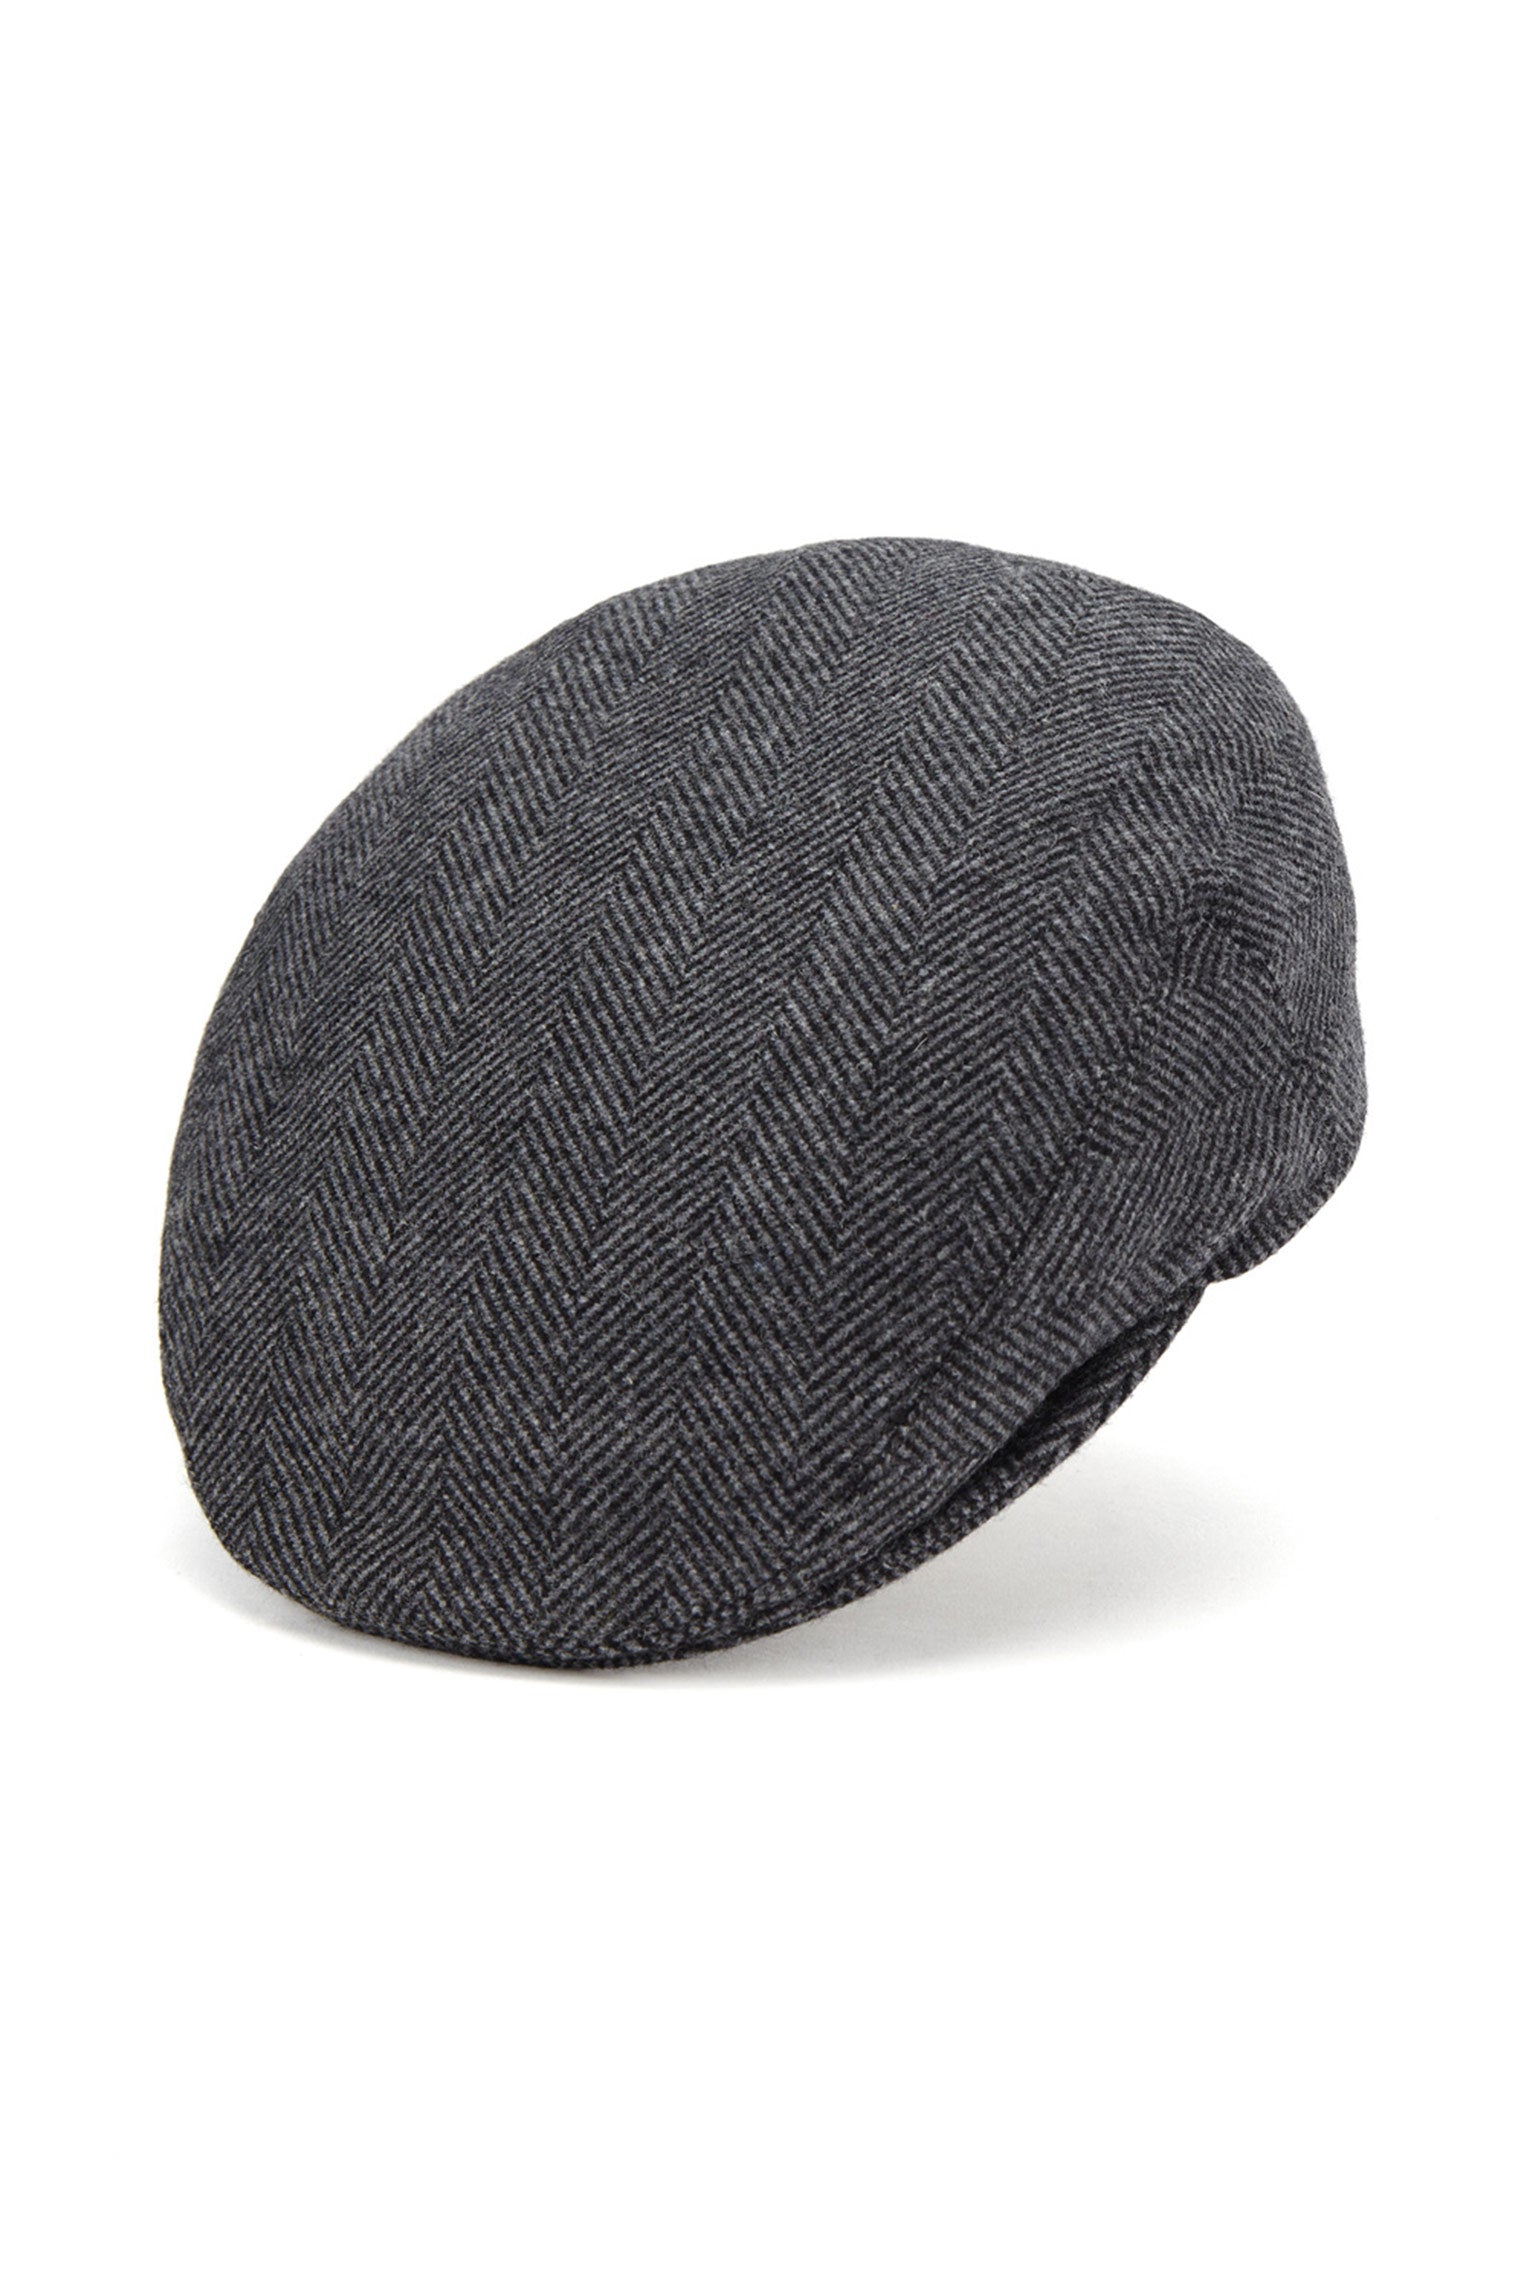 Gill Flat Cap - Products - Lock & Co. Hatters London UK